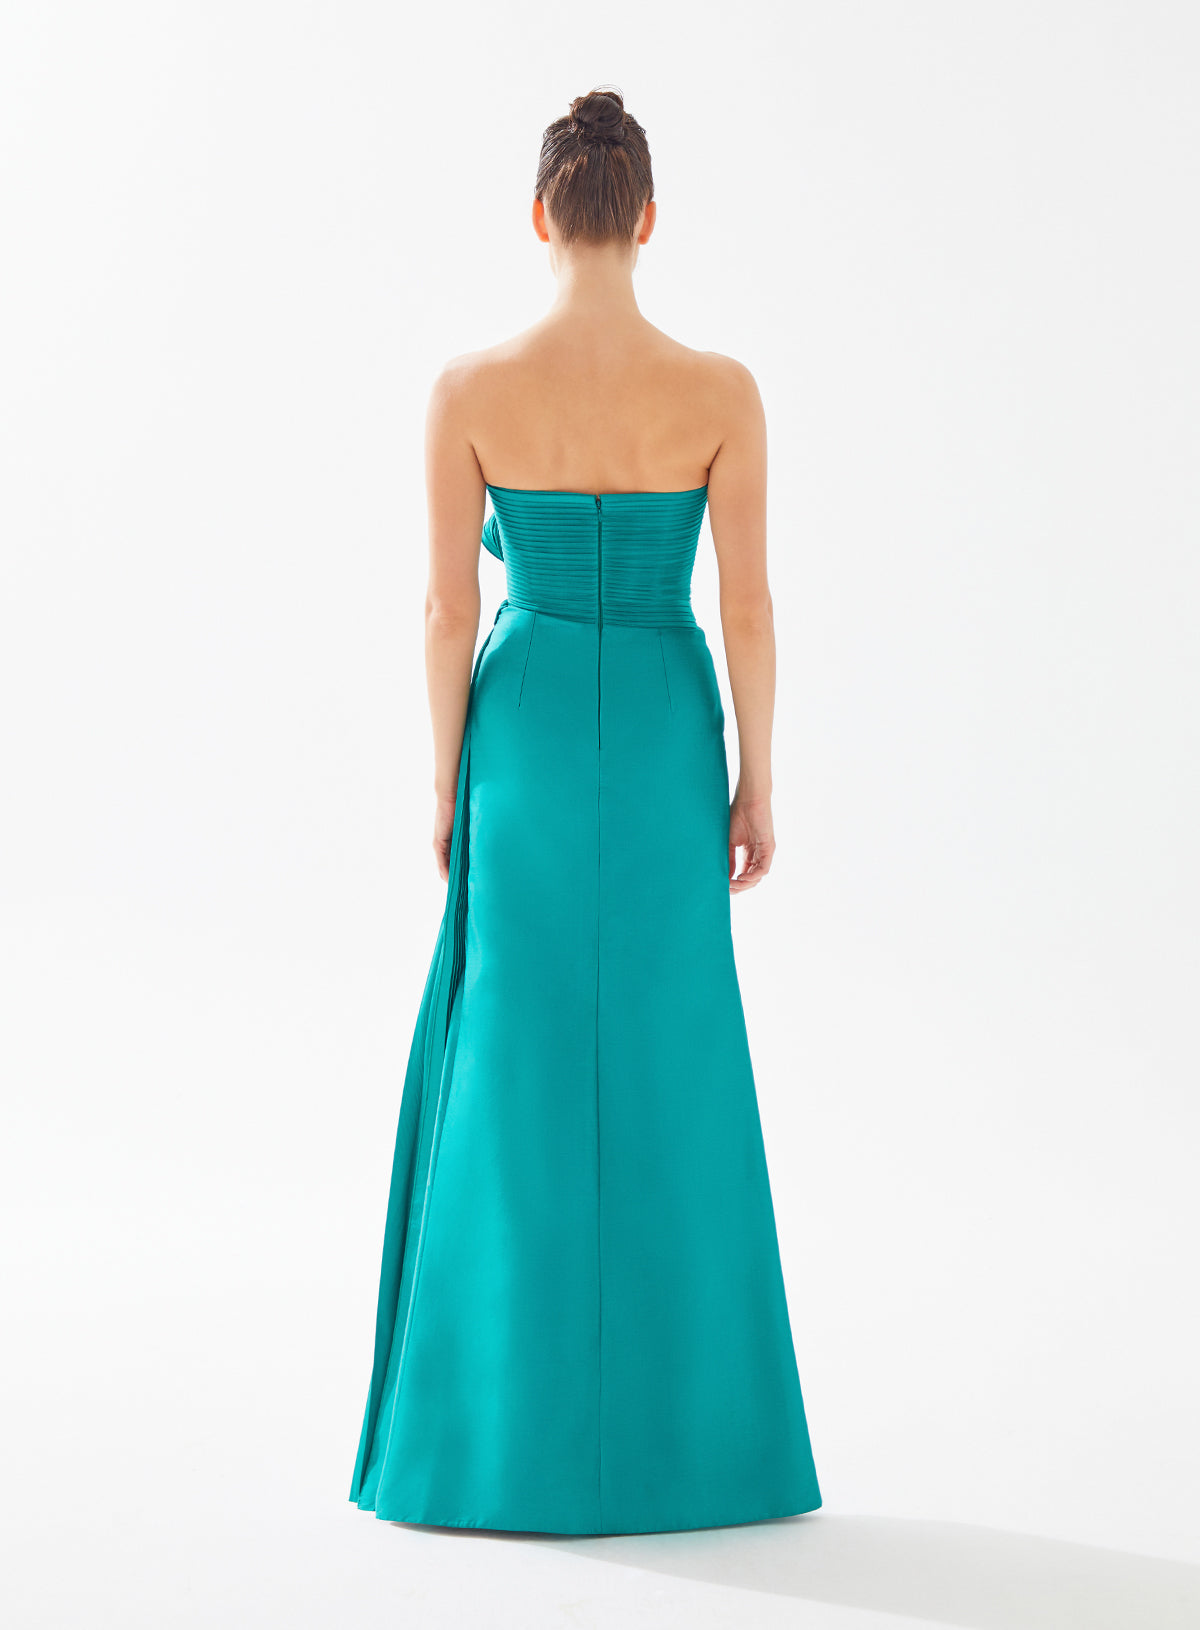 Stunning strapless draped dress with side pleat and bow by Tarik Ediz, available at Madeline's Boutique in Toronto and Boca Raton